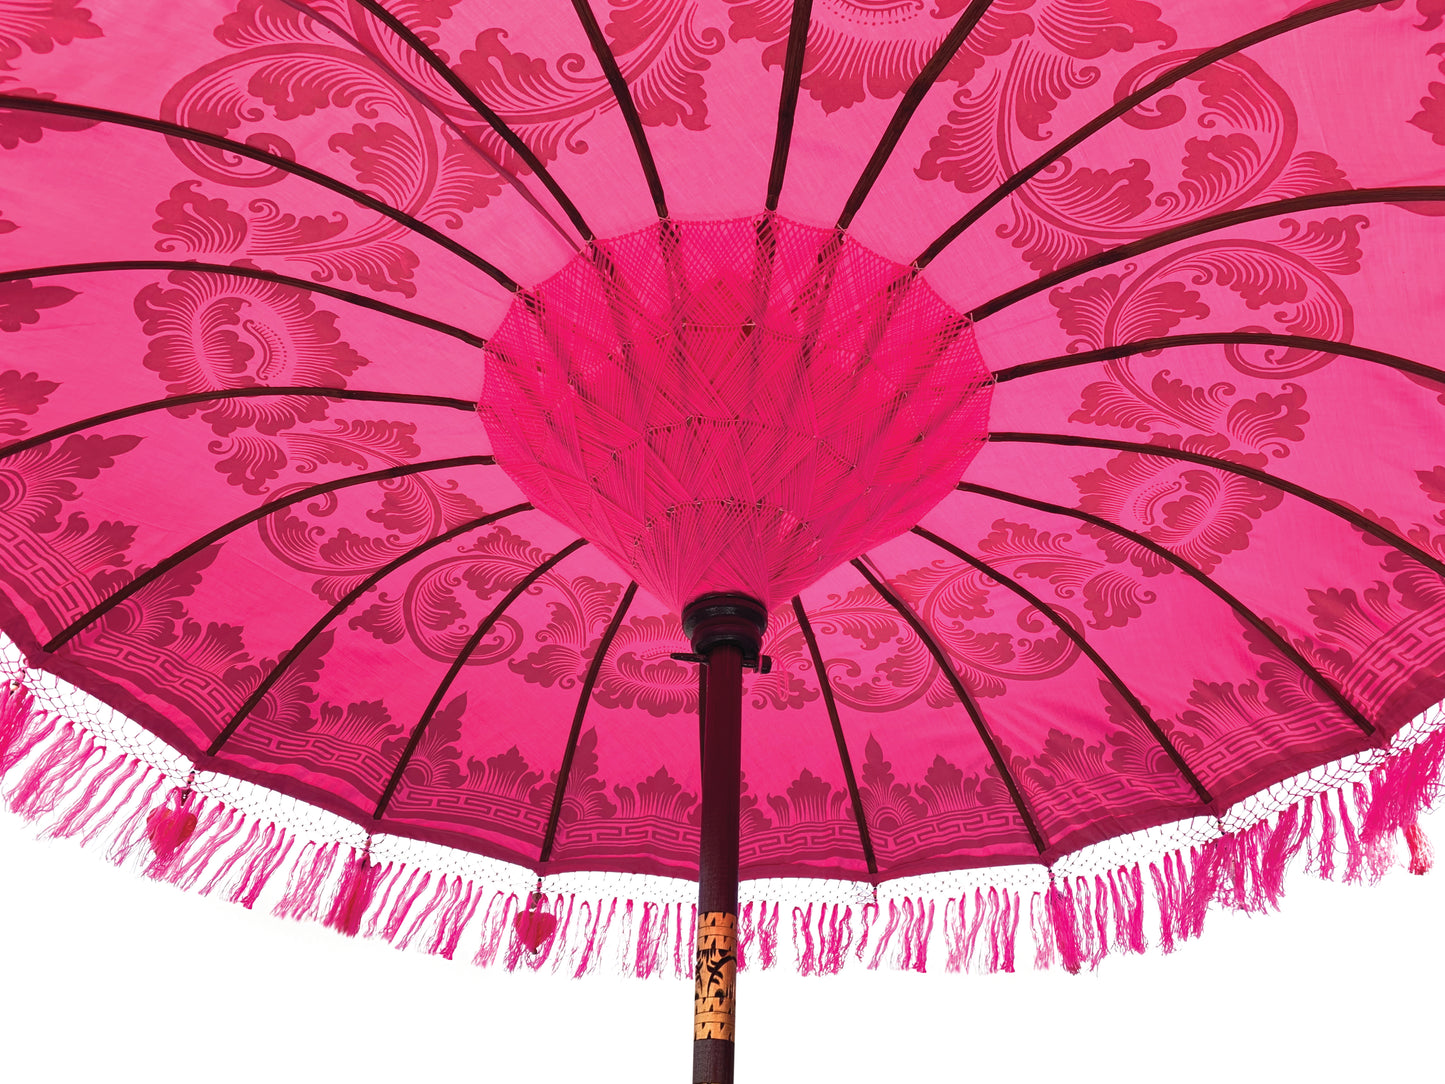 Garden Ceremonial Material Parasols Hand Made in Bali, Bases Also Available